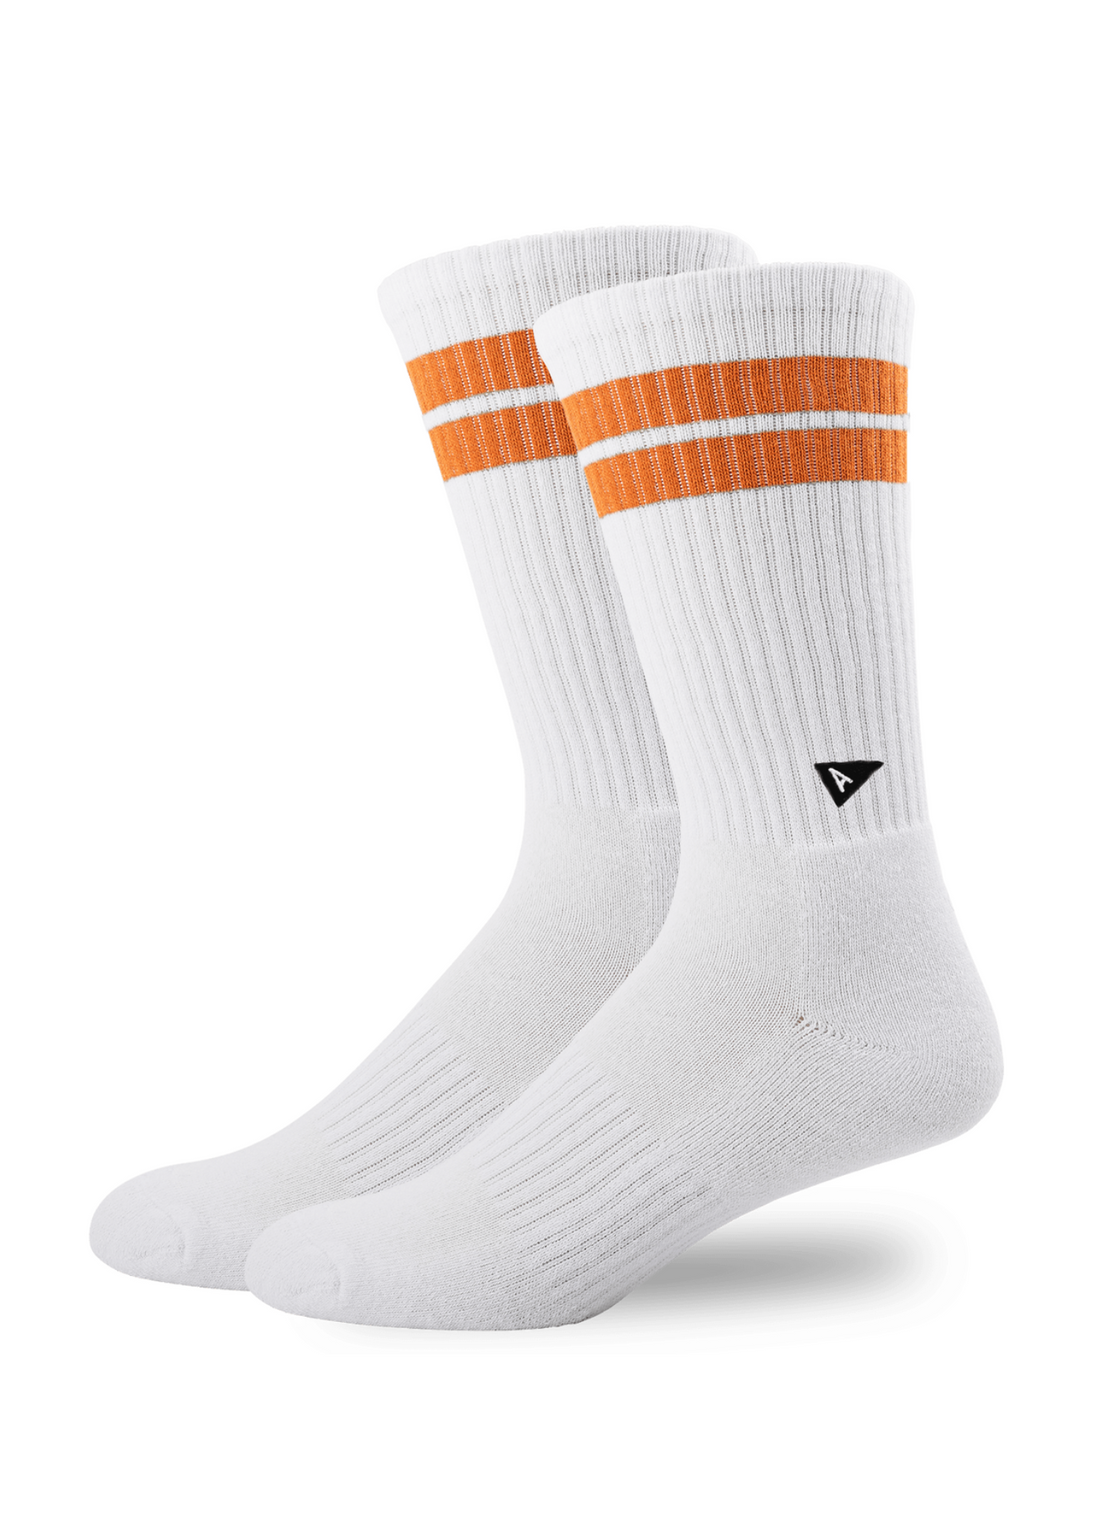 Arvin Goods Tall Crew Sock White with Black Stripes